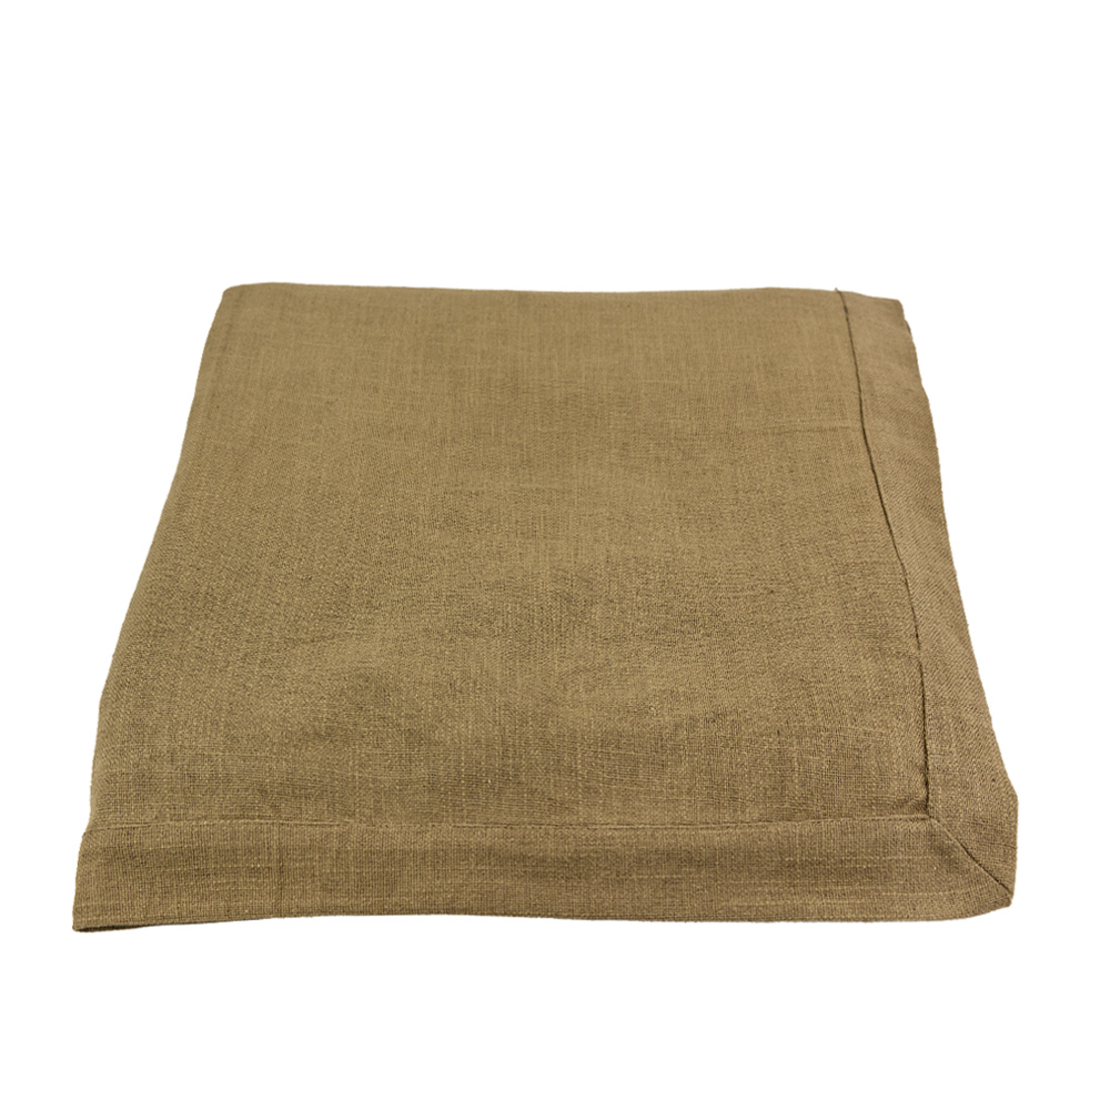 MANTEL OLIVE B TABLECLOTH/RUNNER COTTON OLIVE GREE